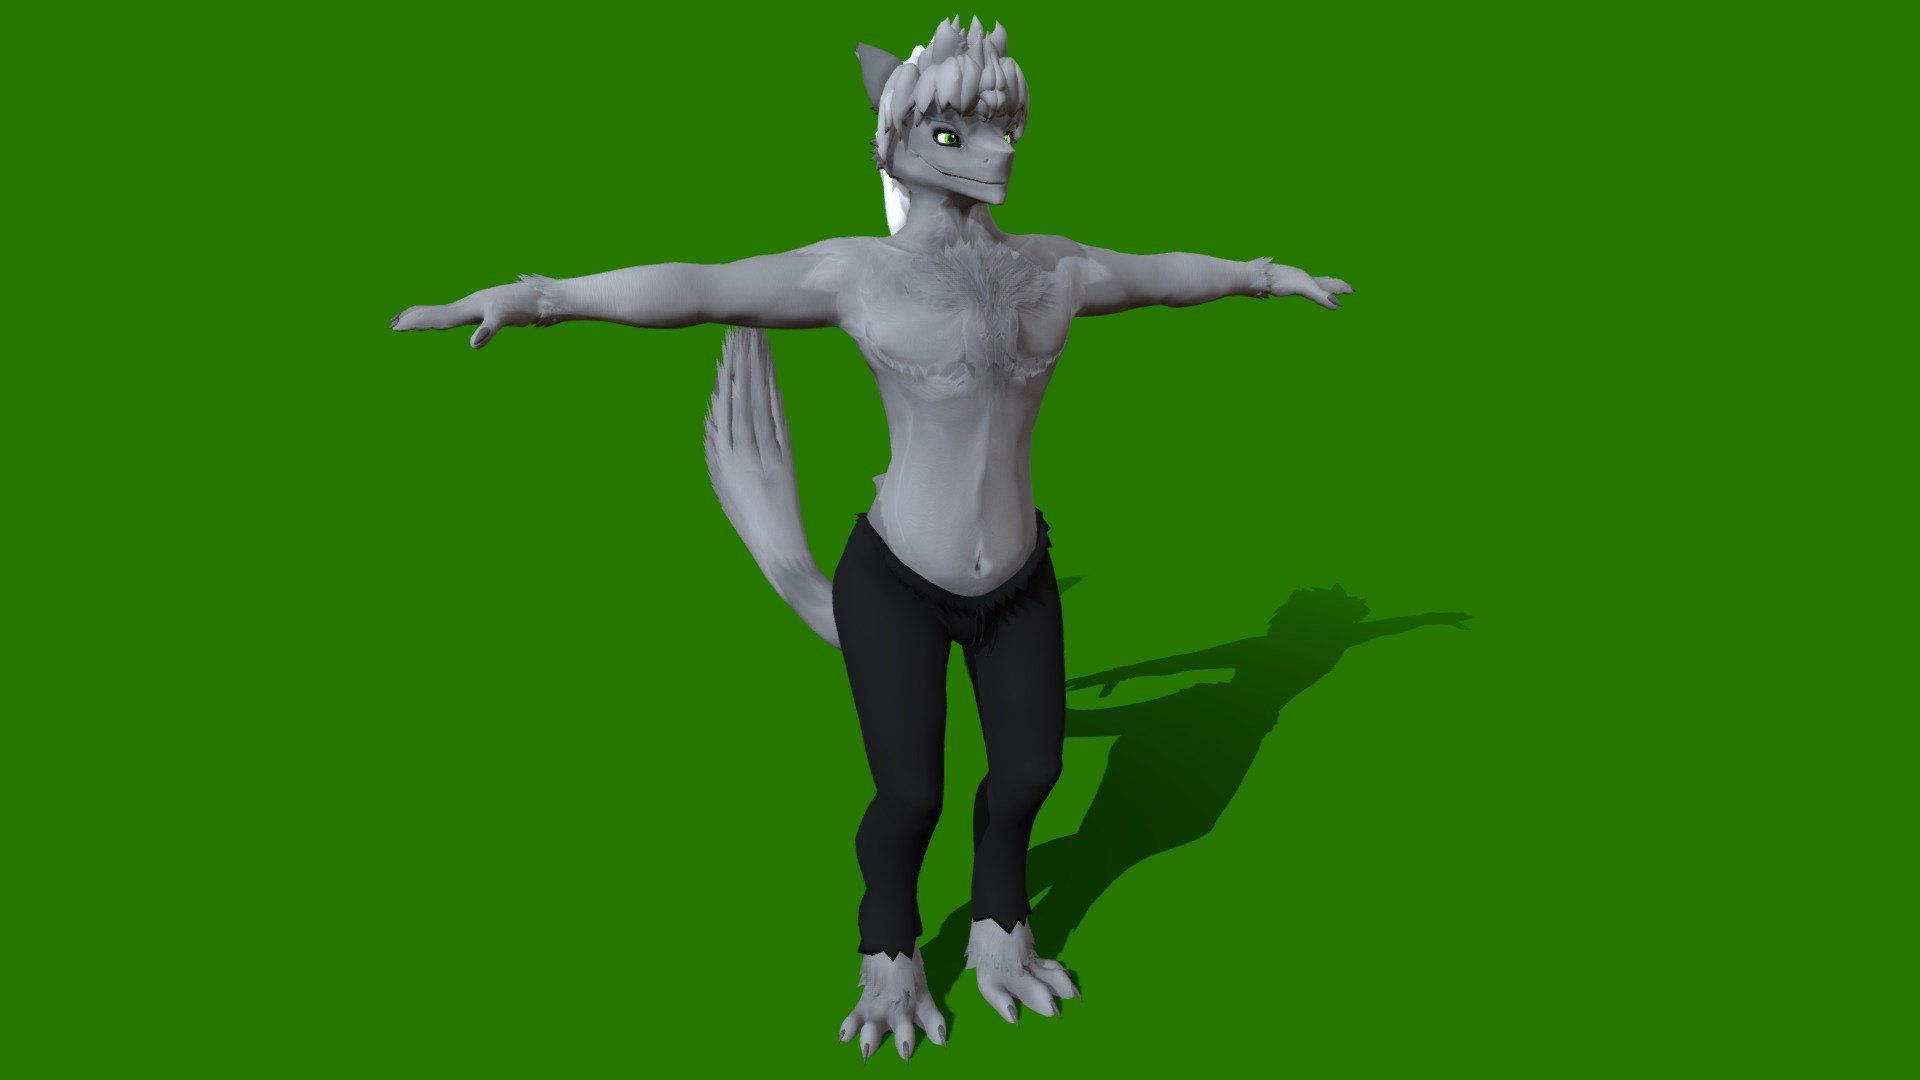 Male version adapted from the last sergal model because some people asked for it!

Free to download, VR ready. If you want to donate a little as thanks, look on Gumroad (vr_zab) for the UnityPackage and set your own pricetag ($1+). You can get the same package on VRCMods as well (free), just search for Sergal or Zab.

If you download here instead, make sure to remove one of the outfits in Unity, check “Keep Quads” box on the FBX import settings and &ldquo;Import